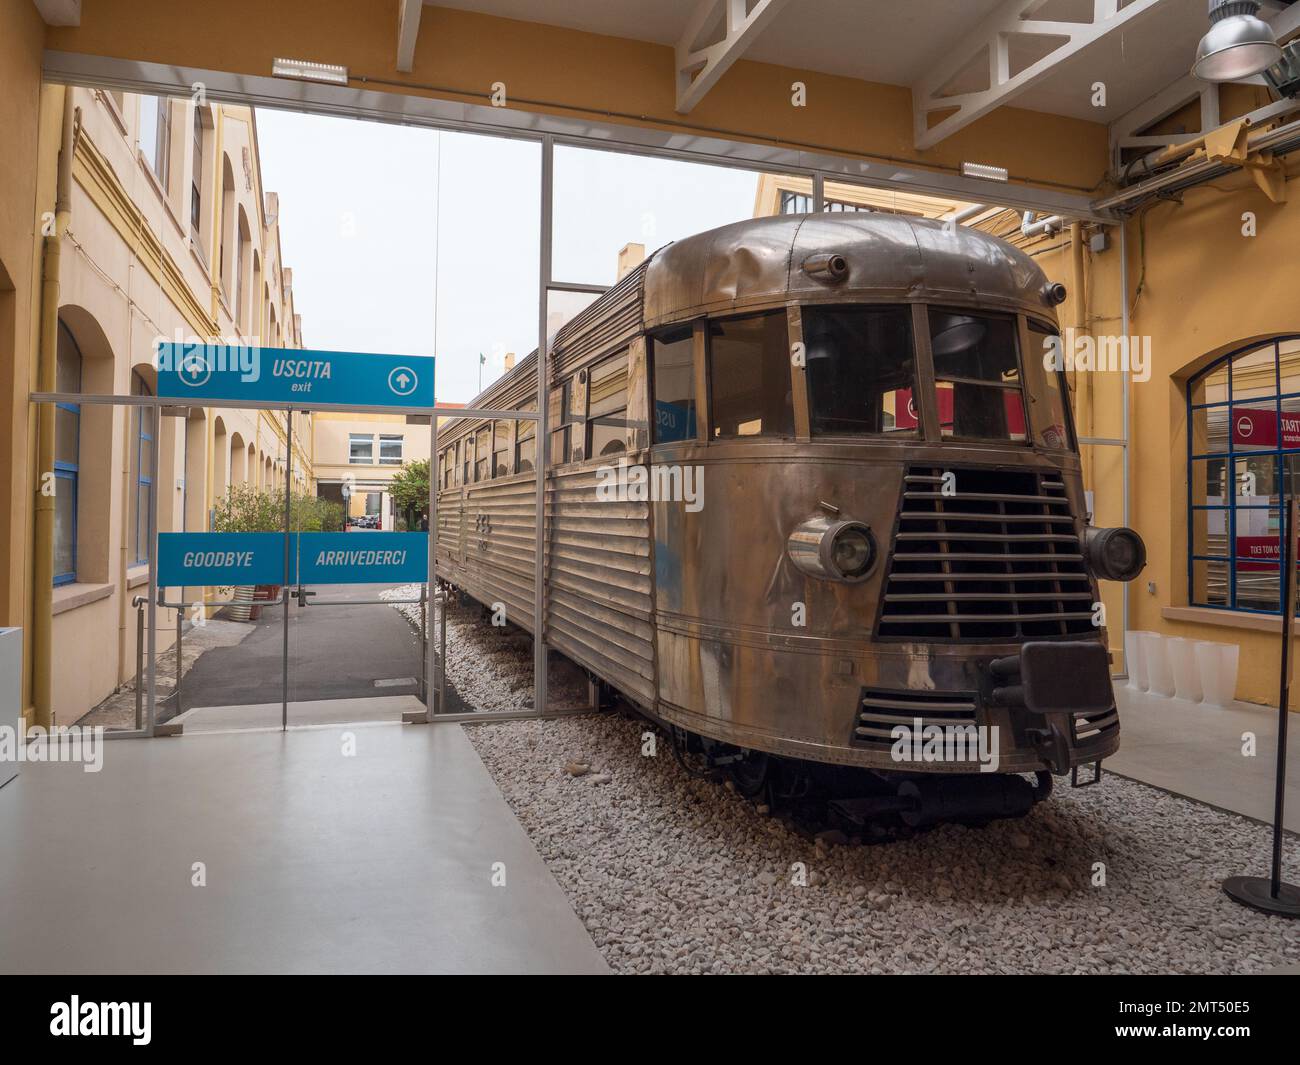 An Aluminium train in the entrance of the museum to Vespa scooters at the Piaggio museum, Pontedera, Italy Stock Photo